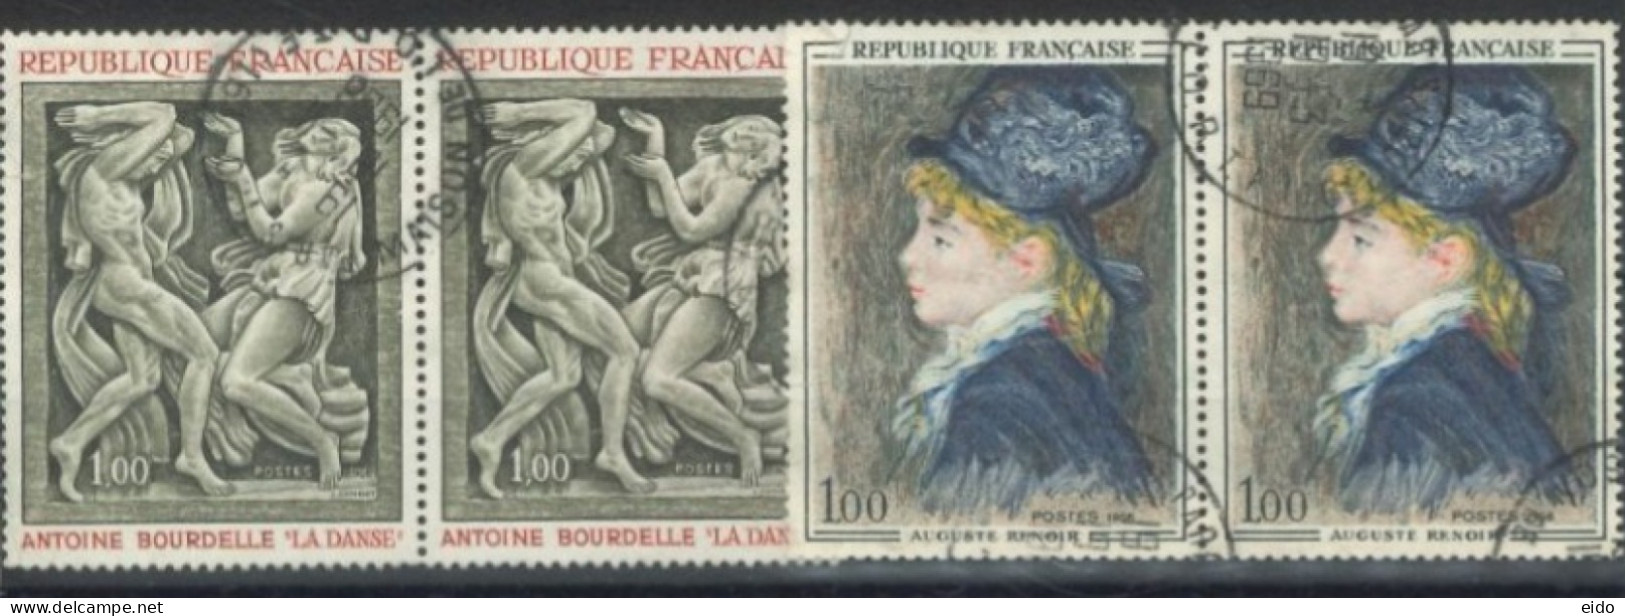 FRANCE - 1968, POLYCHROME PAINTINGS STAMPS SET OF 2, ONE PAIR OF EACH, USED - Oblitérés